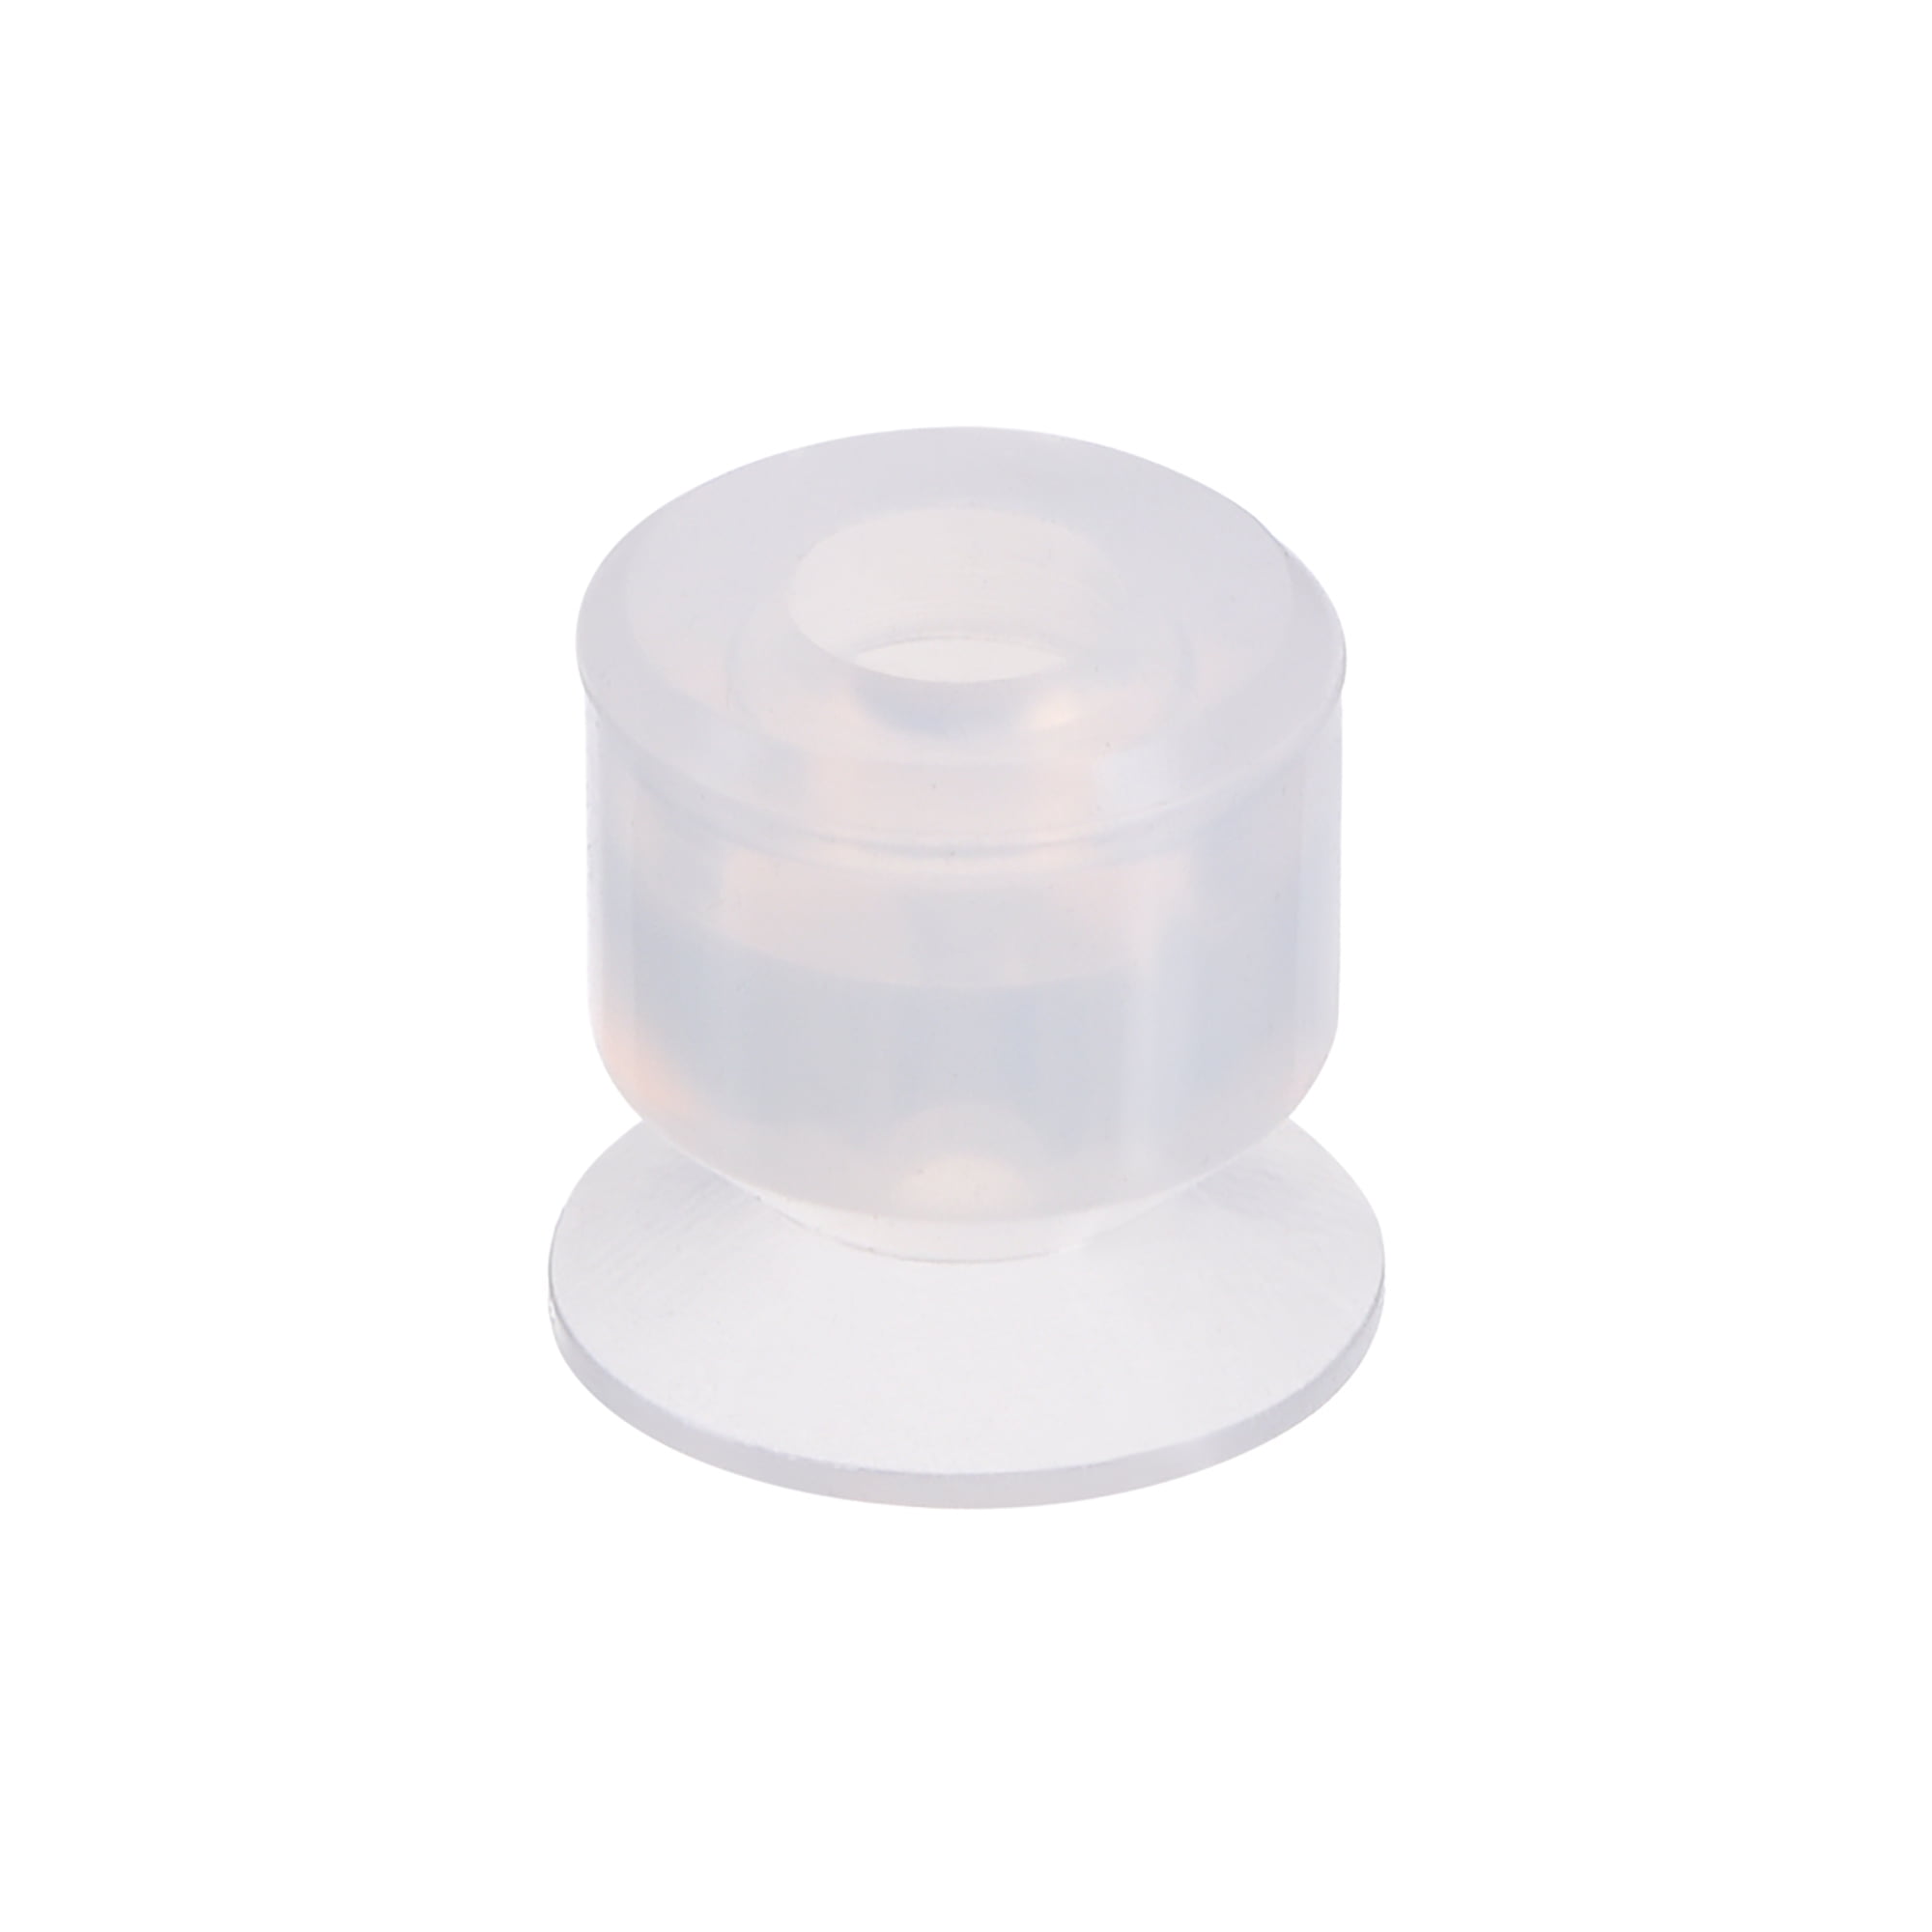 Clear White Soft Silicone Waterproof Miniature Vacuum Suction Cup